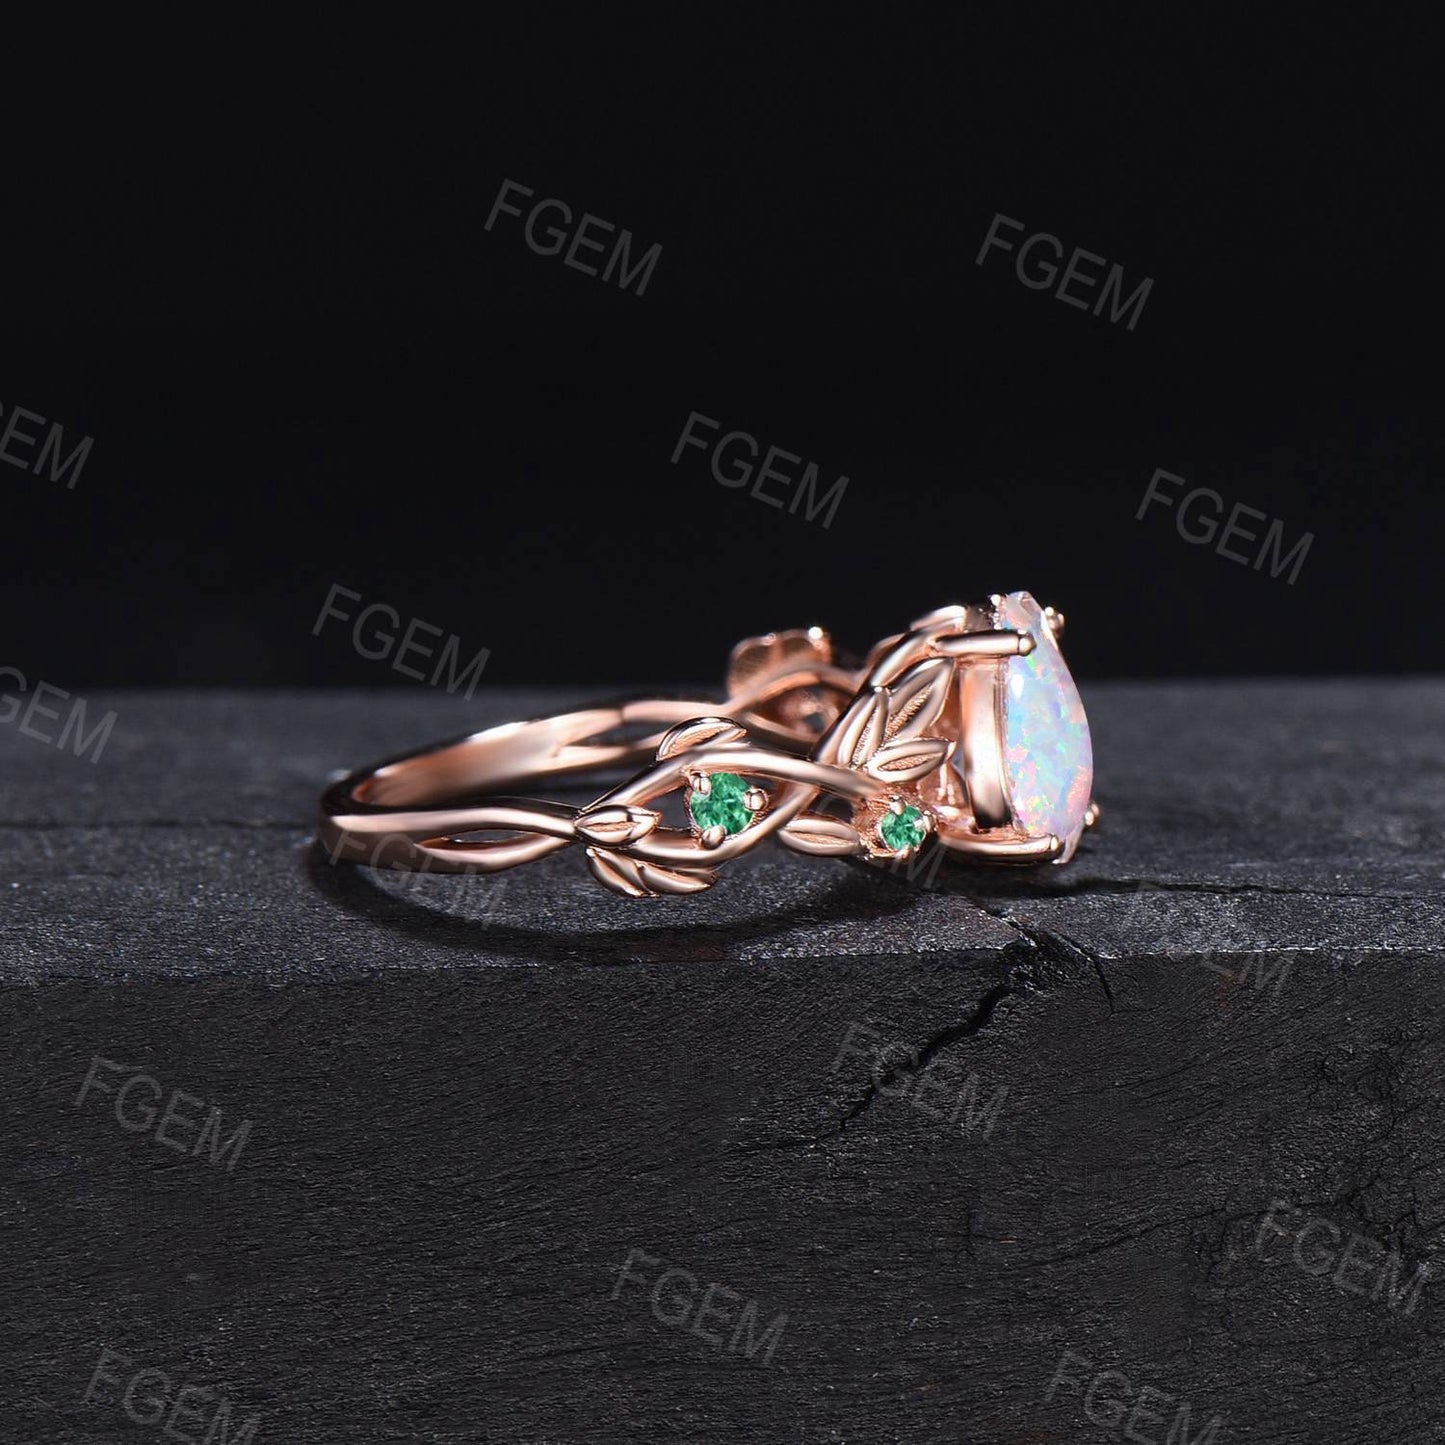 Leaf Opal Engagement Rings Vintage 14K Rose Gold 1.25ct Pear Shaped Unique Nature Inspired Opal Wedding Ring Set Green Emerald Wedding Band